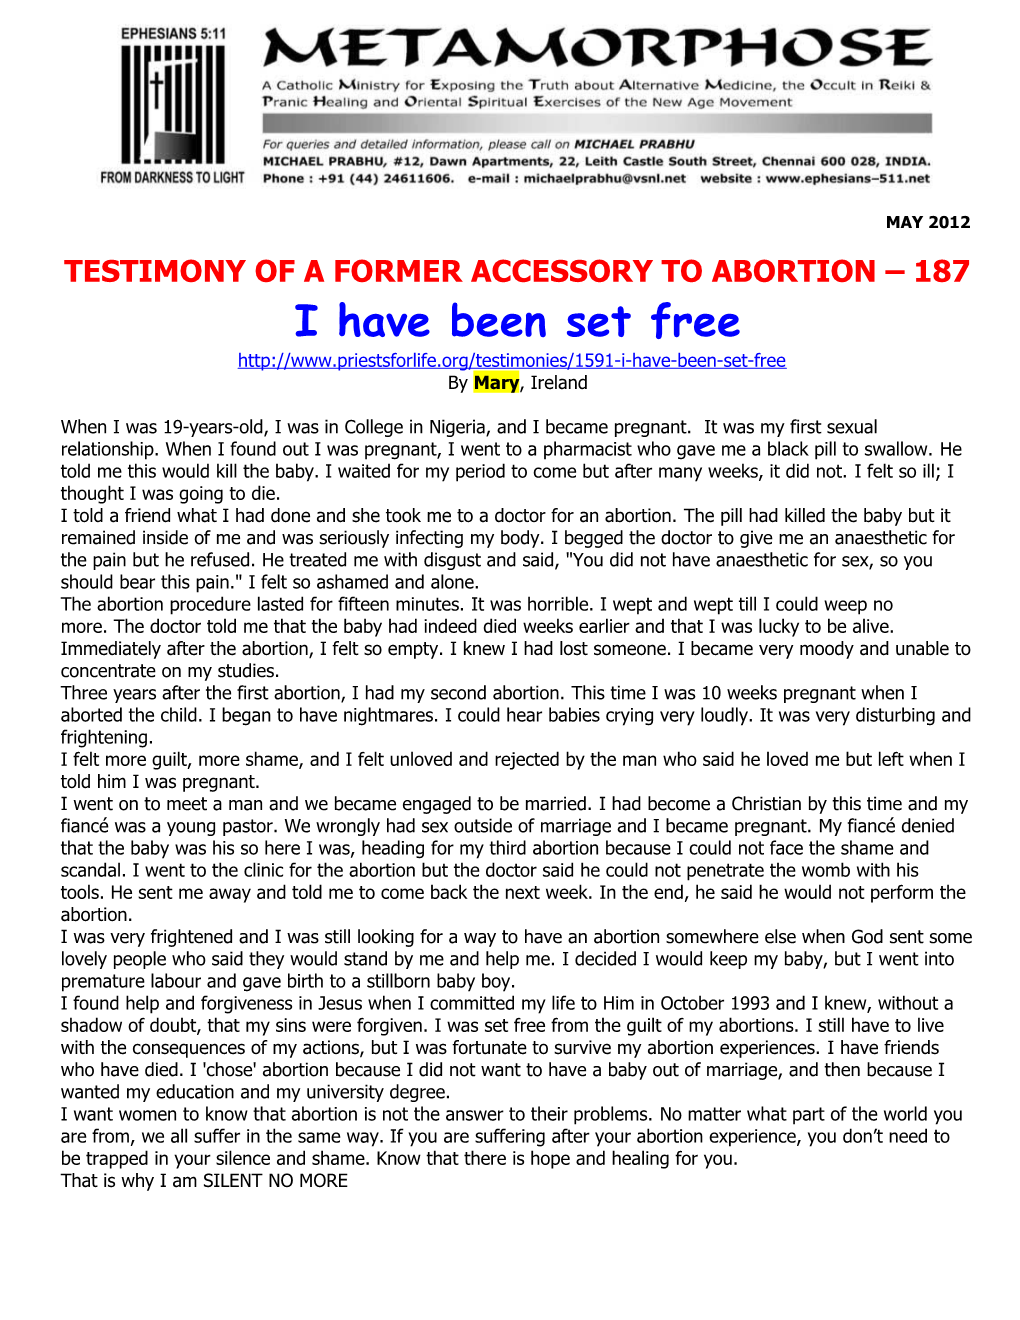 Testimony of a Formeraccessory to Abortion 187